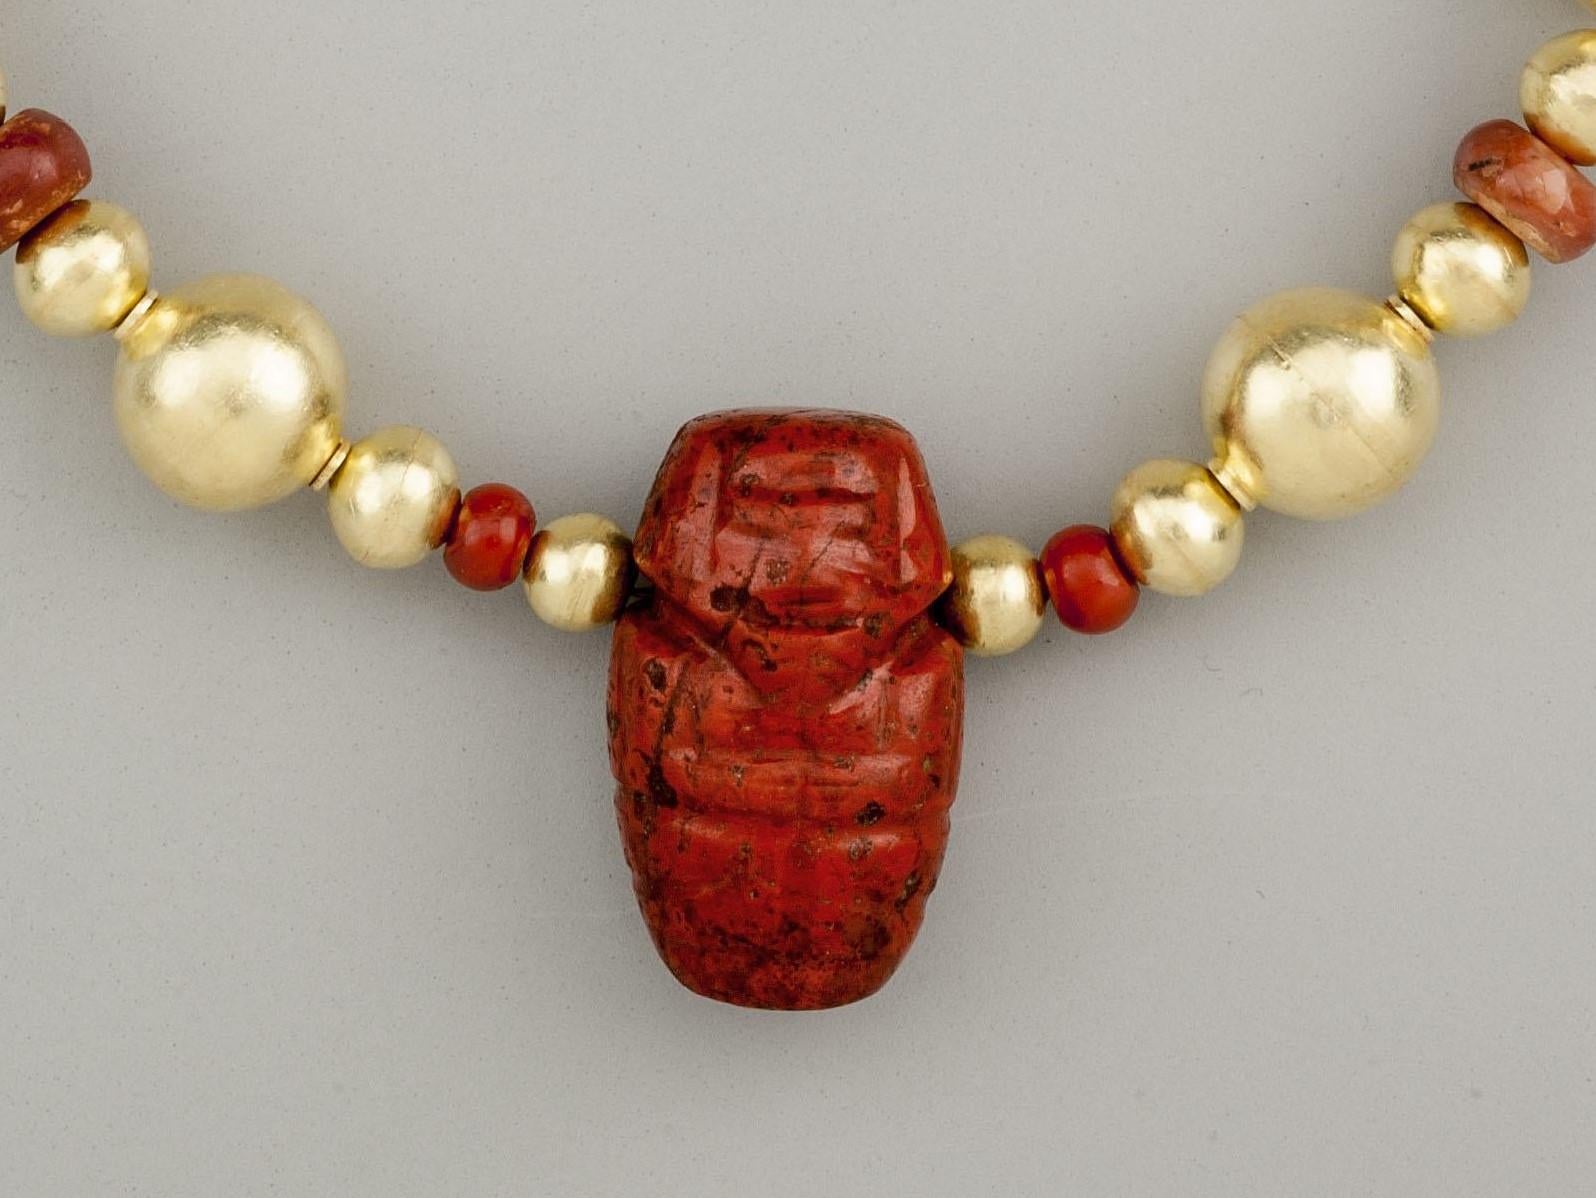 Twenty-eight round gold beads with ten carnelian beads, two of which are cylindrical tubes and eight flattened spheres, and a jasper effigy of a man, presumably a chief. The stone pieces are said to be from the Tairona people of Colombia, South